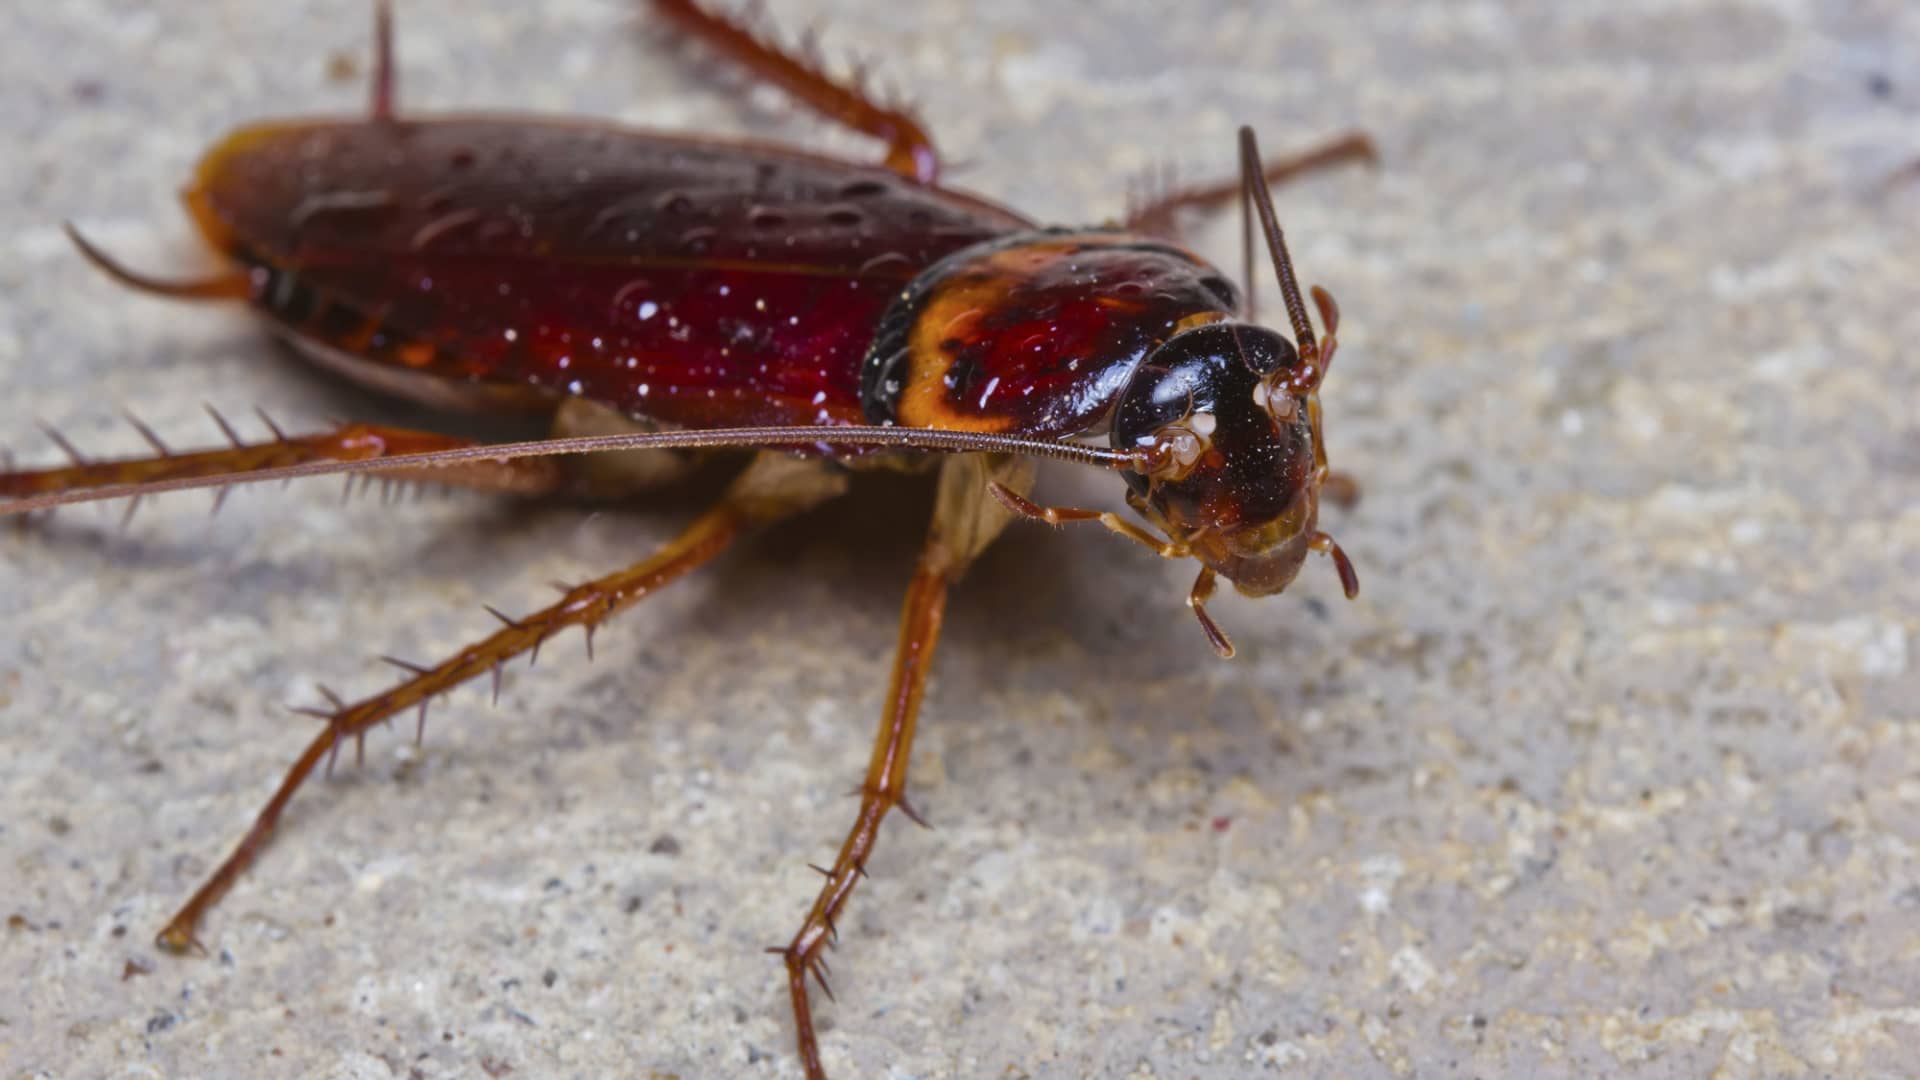 Cockroaches may fly because of heat, experts say